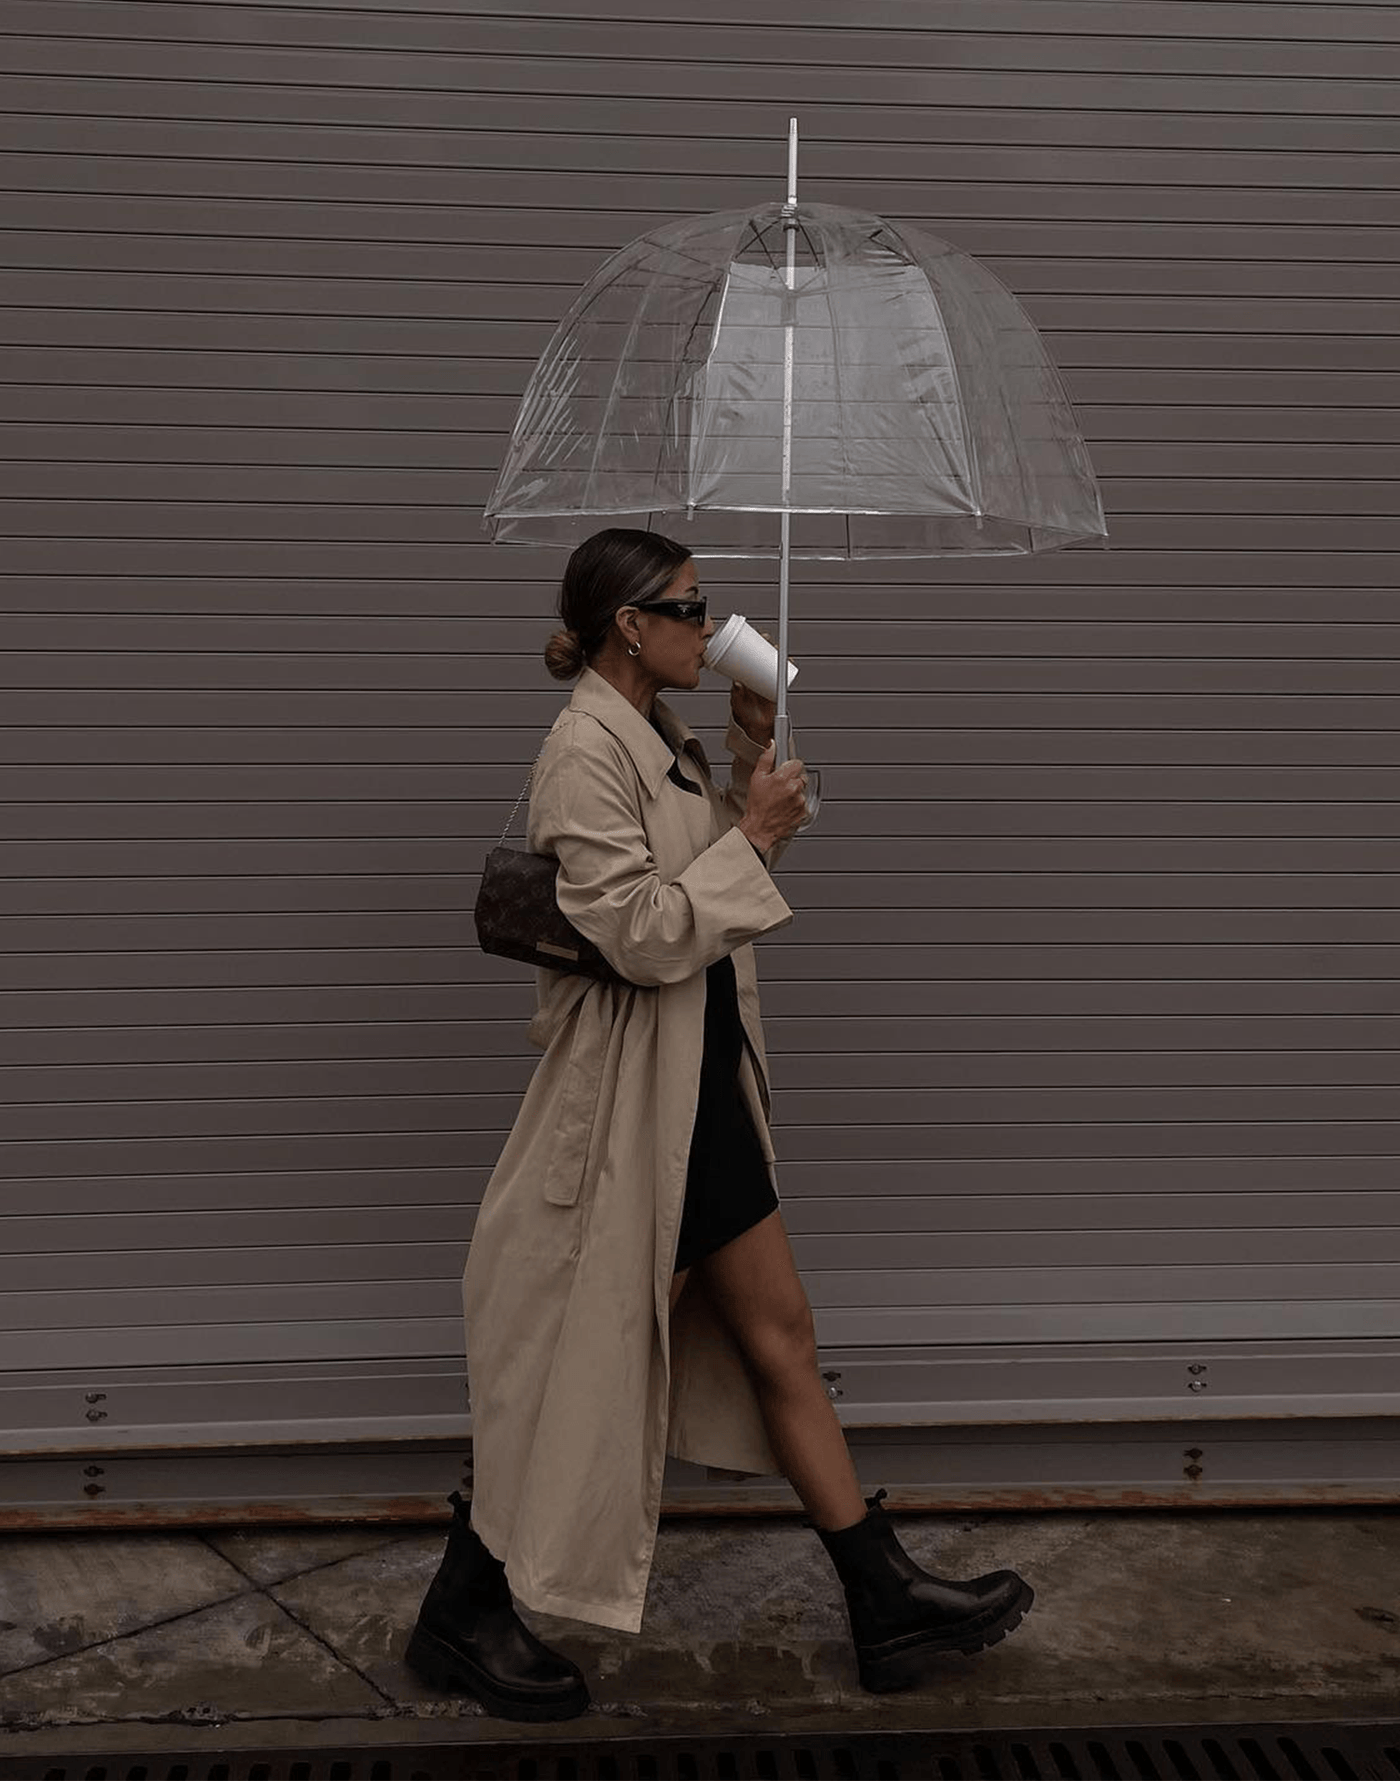 Portrait Trench Coat (Beige) - Long Tie-Up Jacket - Women's Outerwear - Charcoal Clothing